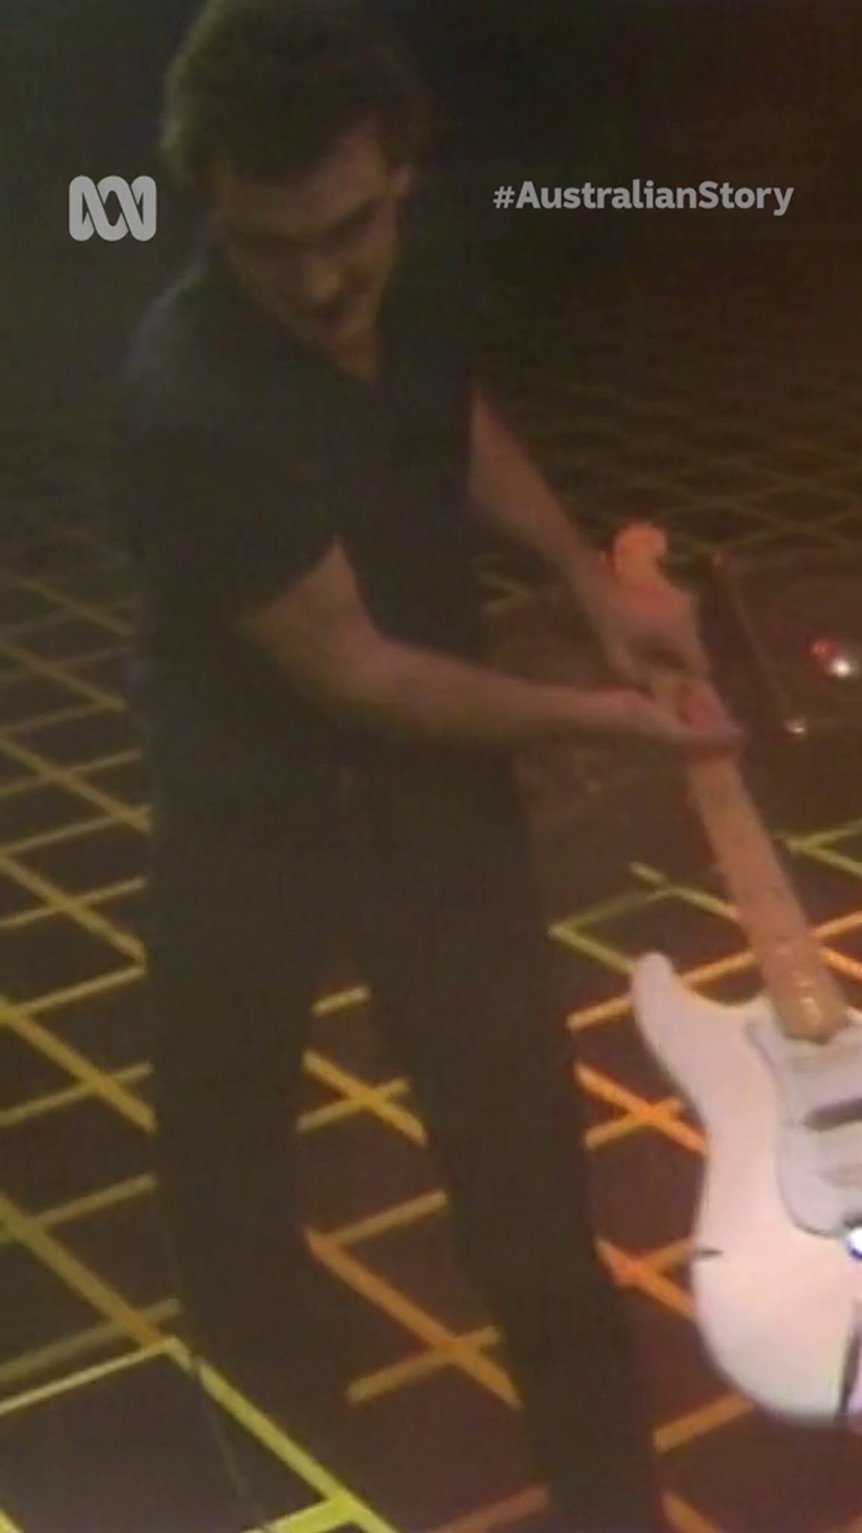 A shot from above shows a man dressed in black with light-tone skin swings a white guitar